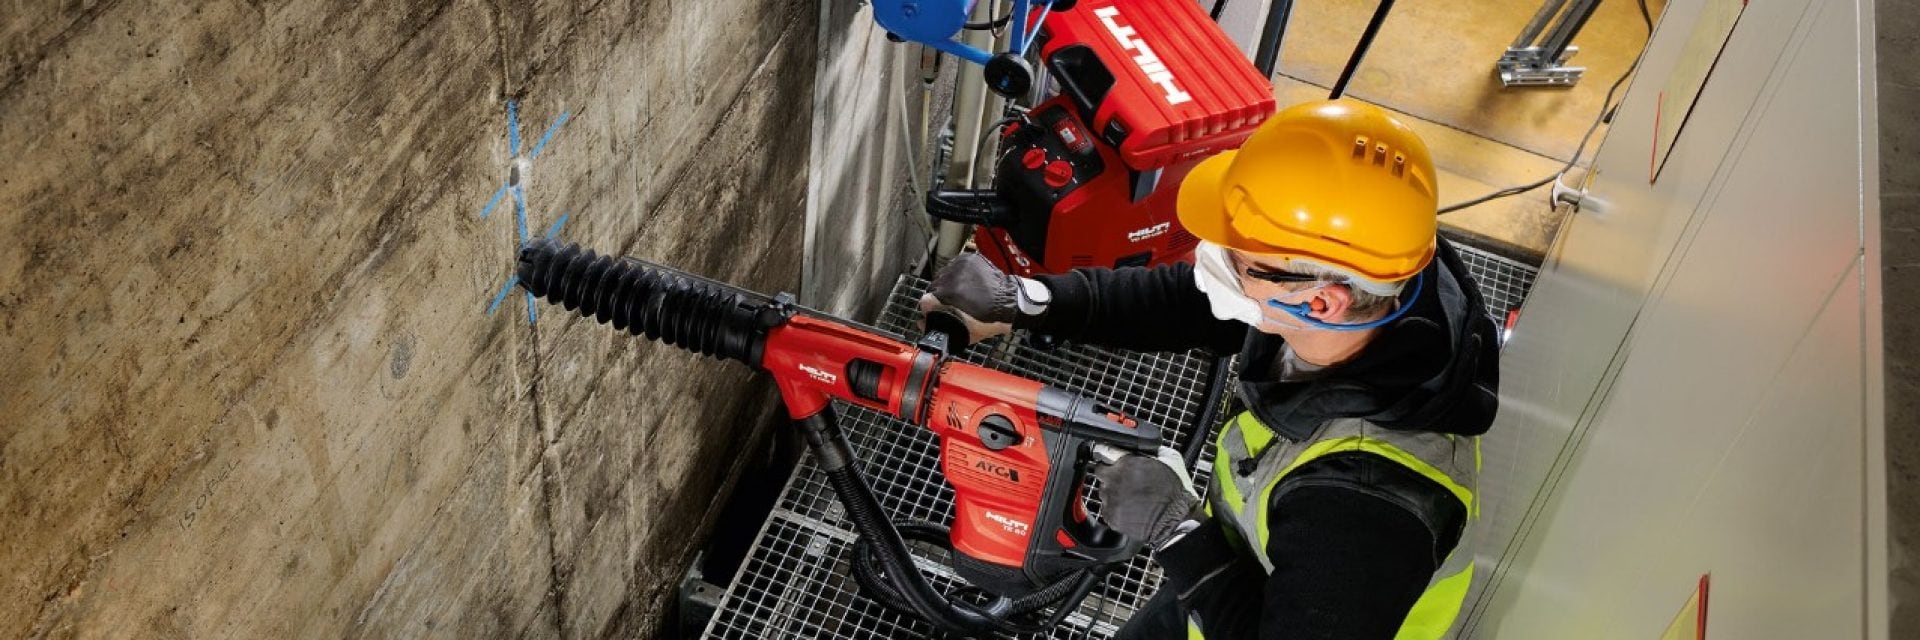 Health and safety at Hilti